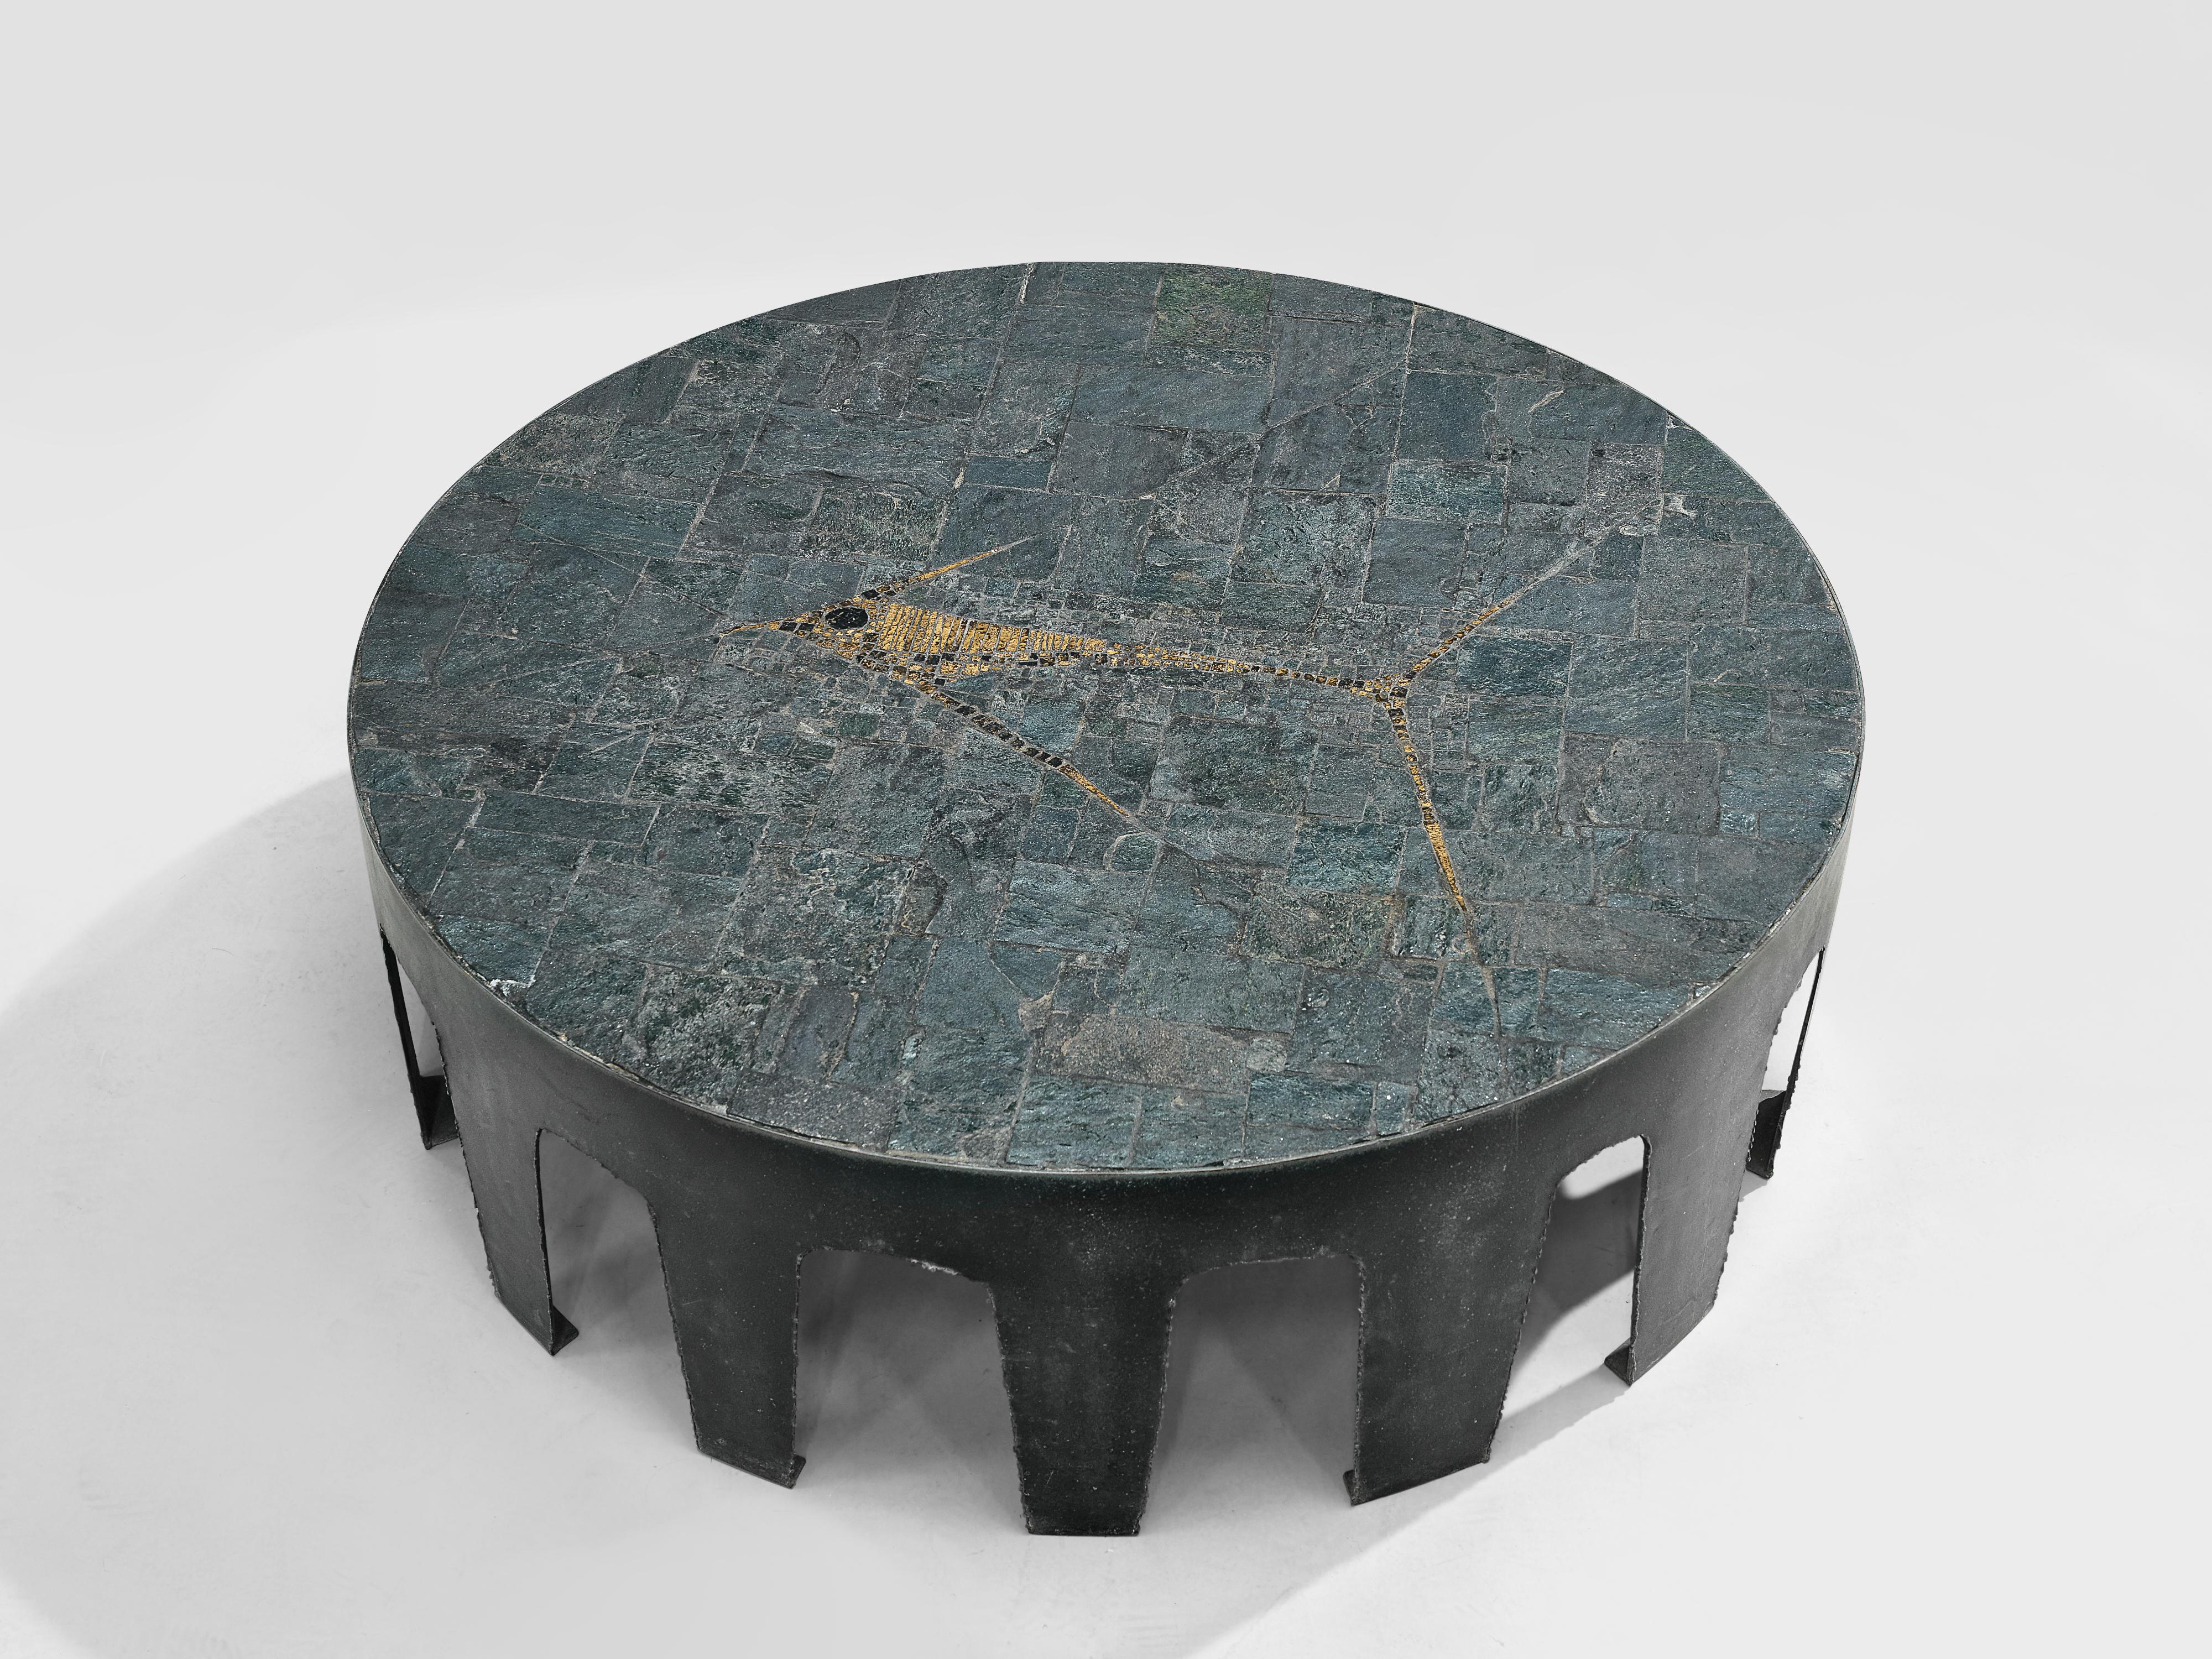 Pia Manu, coffee table, slate, pyrite, iron, Belgium, 1960s

This unique, handmade coffee table with cut and wrought iron frame is designed in the workshop of Pia Manu. First off, the table top is what catches your eye. With its subtle tones of